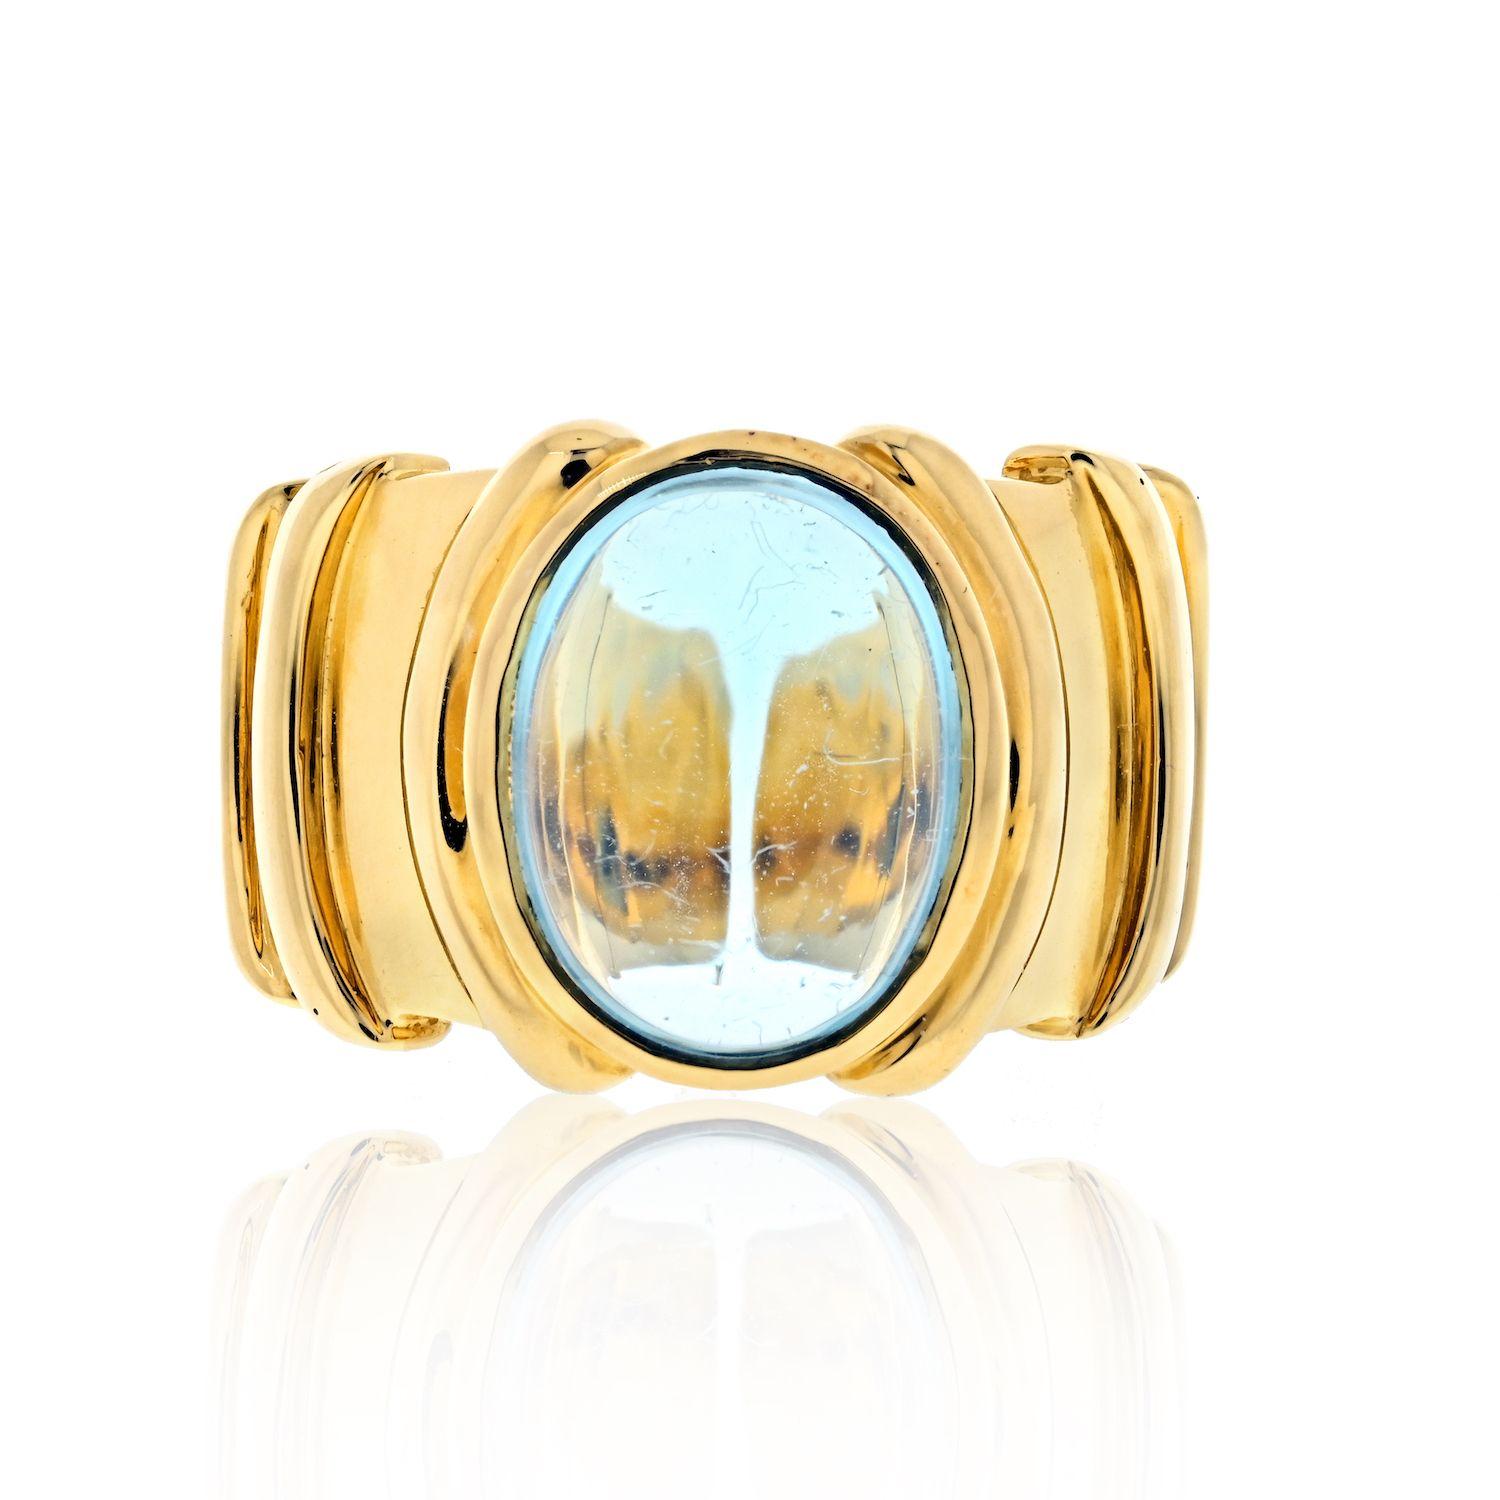 Marina B. 18K Yellow Gold Cabochon Topaz Ring.
18k gold ring by Marina B, with oval blue topaz cabochon (approx. 12.8mm x 10.7mm). Ring size 5.25, top of the ring is 16mm wide. Marked: Marina B.